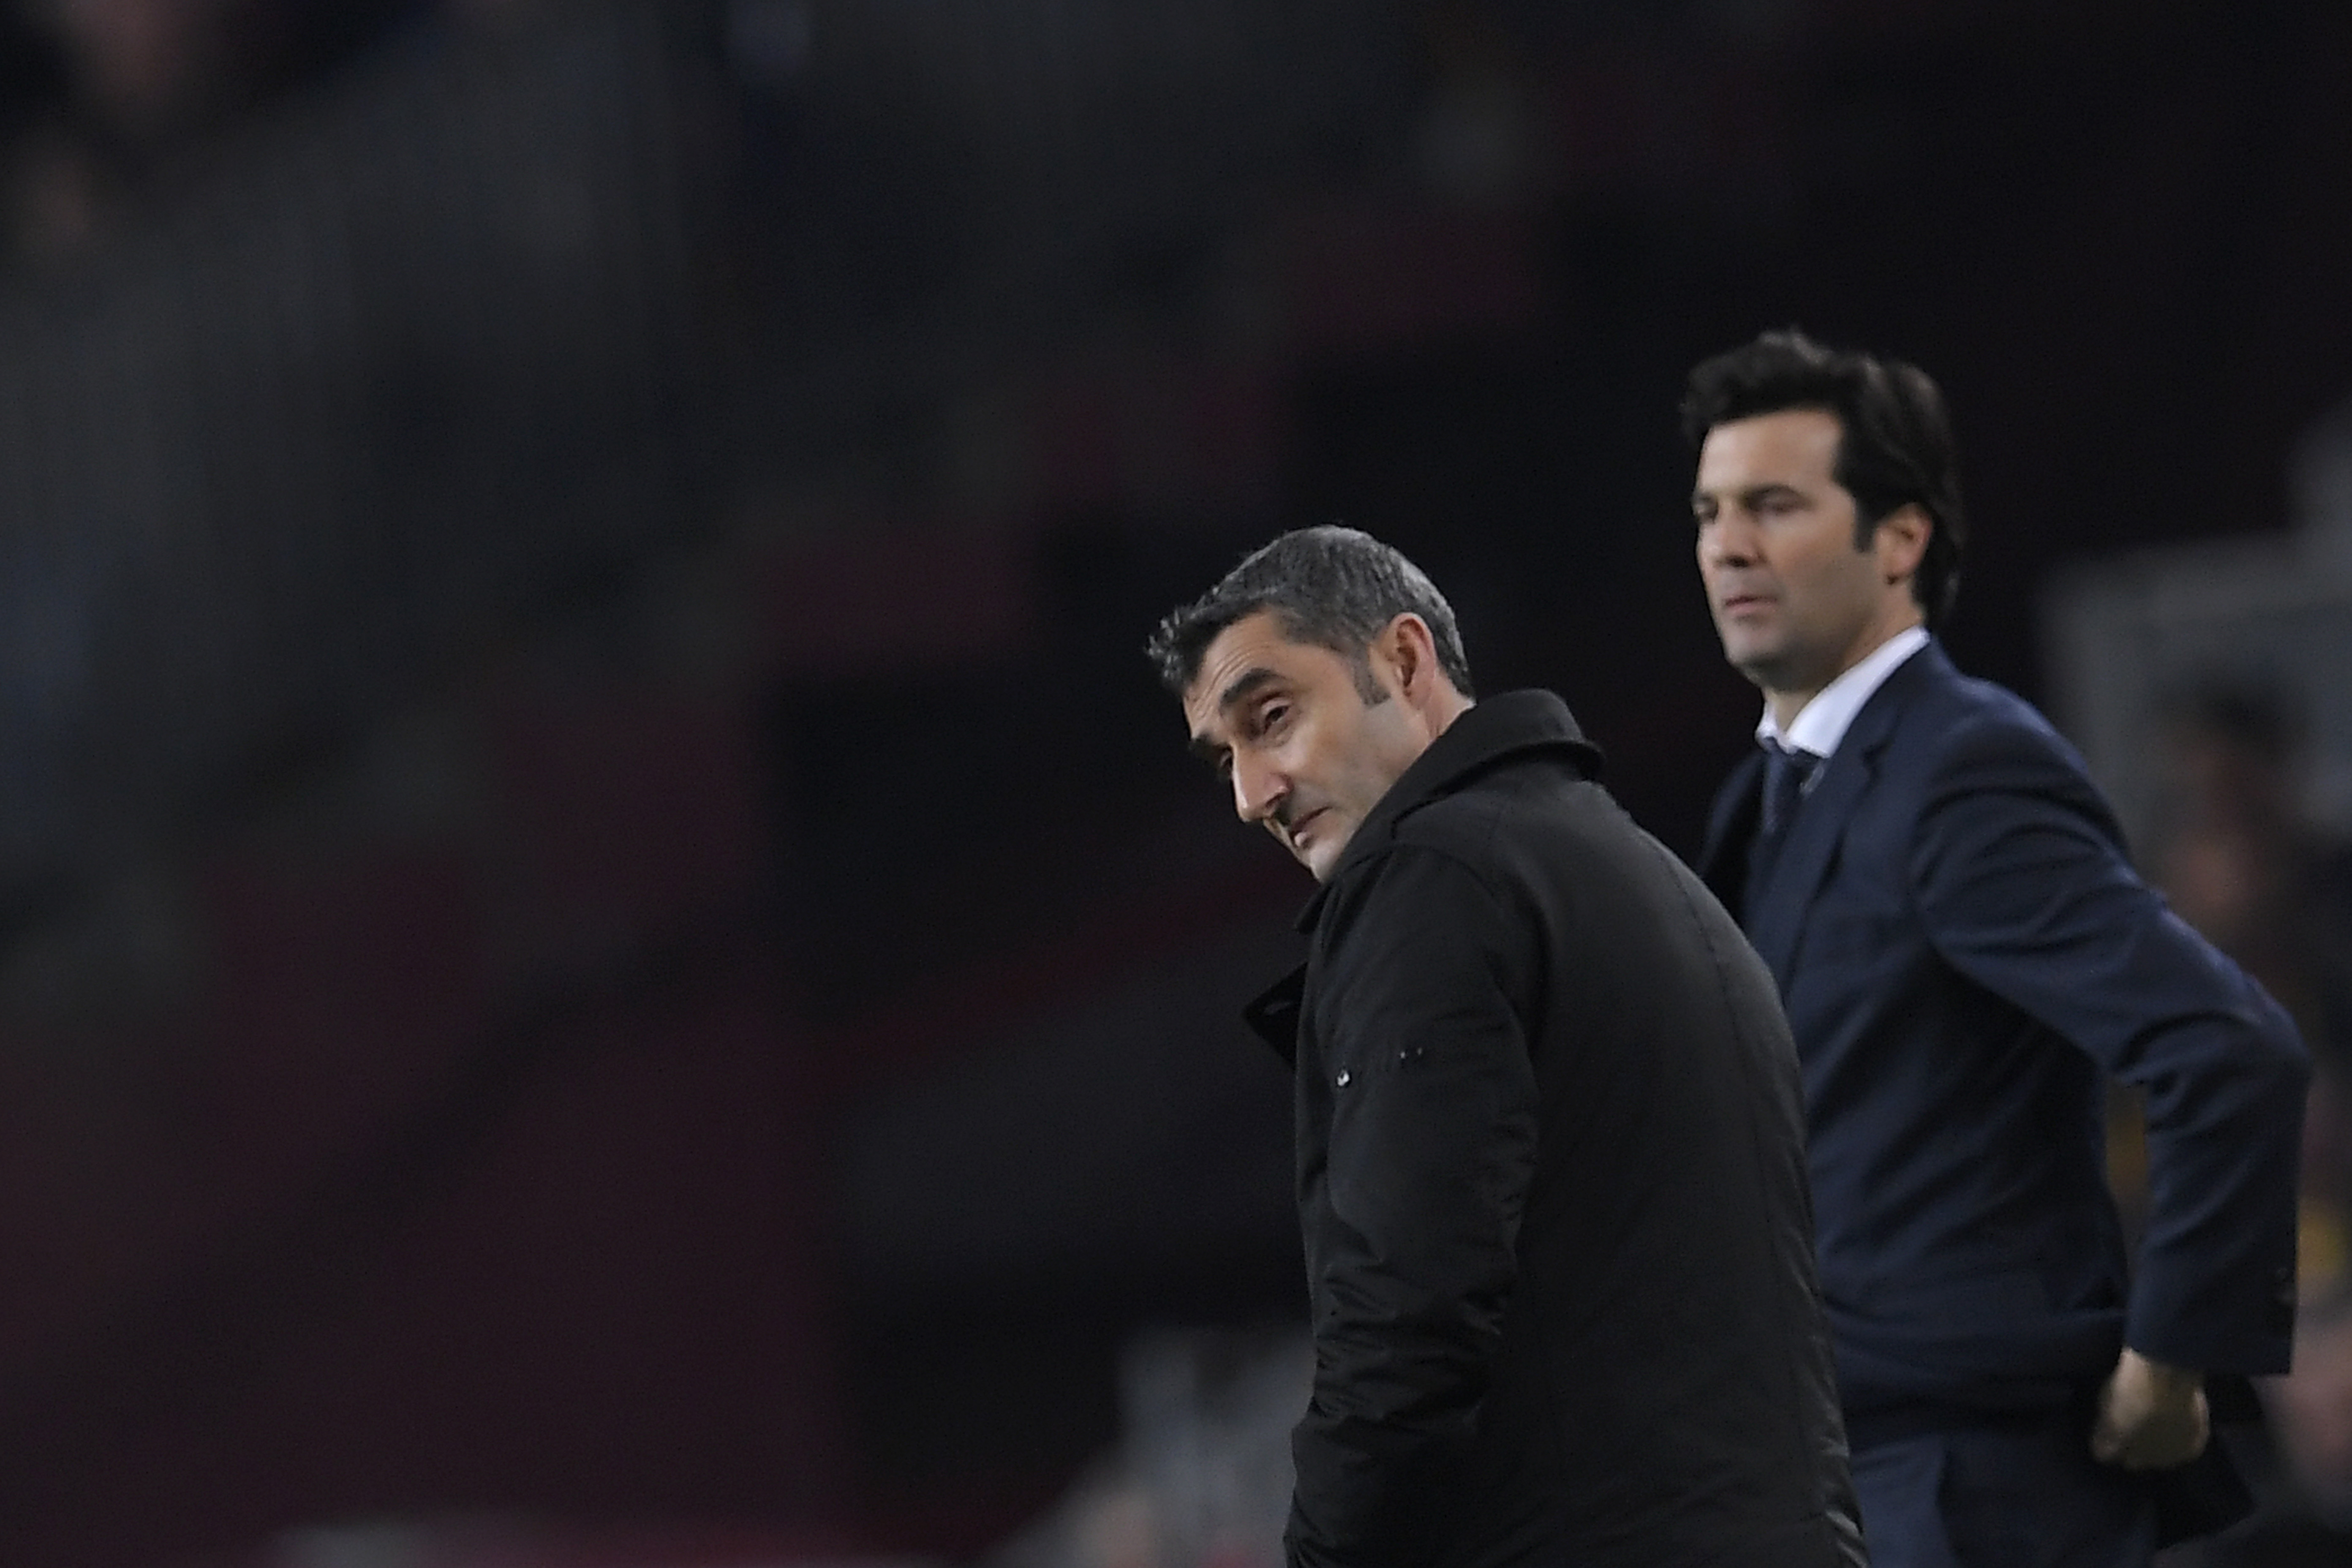 Barcelona's Spanish coach Ernesto Valverde (L) and Real Madrid's Argentinian coach Santiago Solari look on during the Spanish Copa del Rey (King's Cup) semi-final first leg football match between FC Barcelona and Real Madrid CF at the Camp Nou stadium in Barcelona on February 6, 2019. (Photo by LLUIS GENE / AFP)        (Photo credit should read LLUIS GENE/AFP/Getty Images)